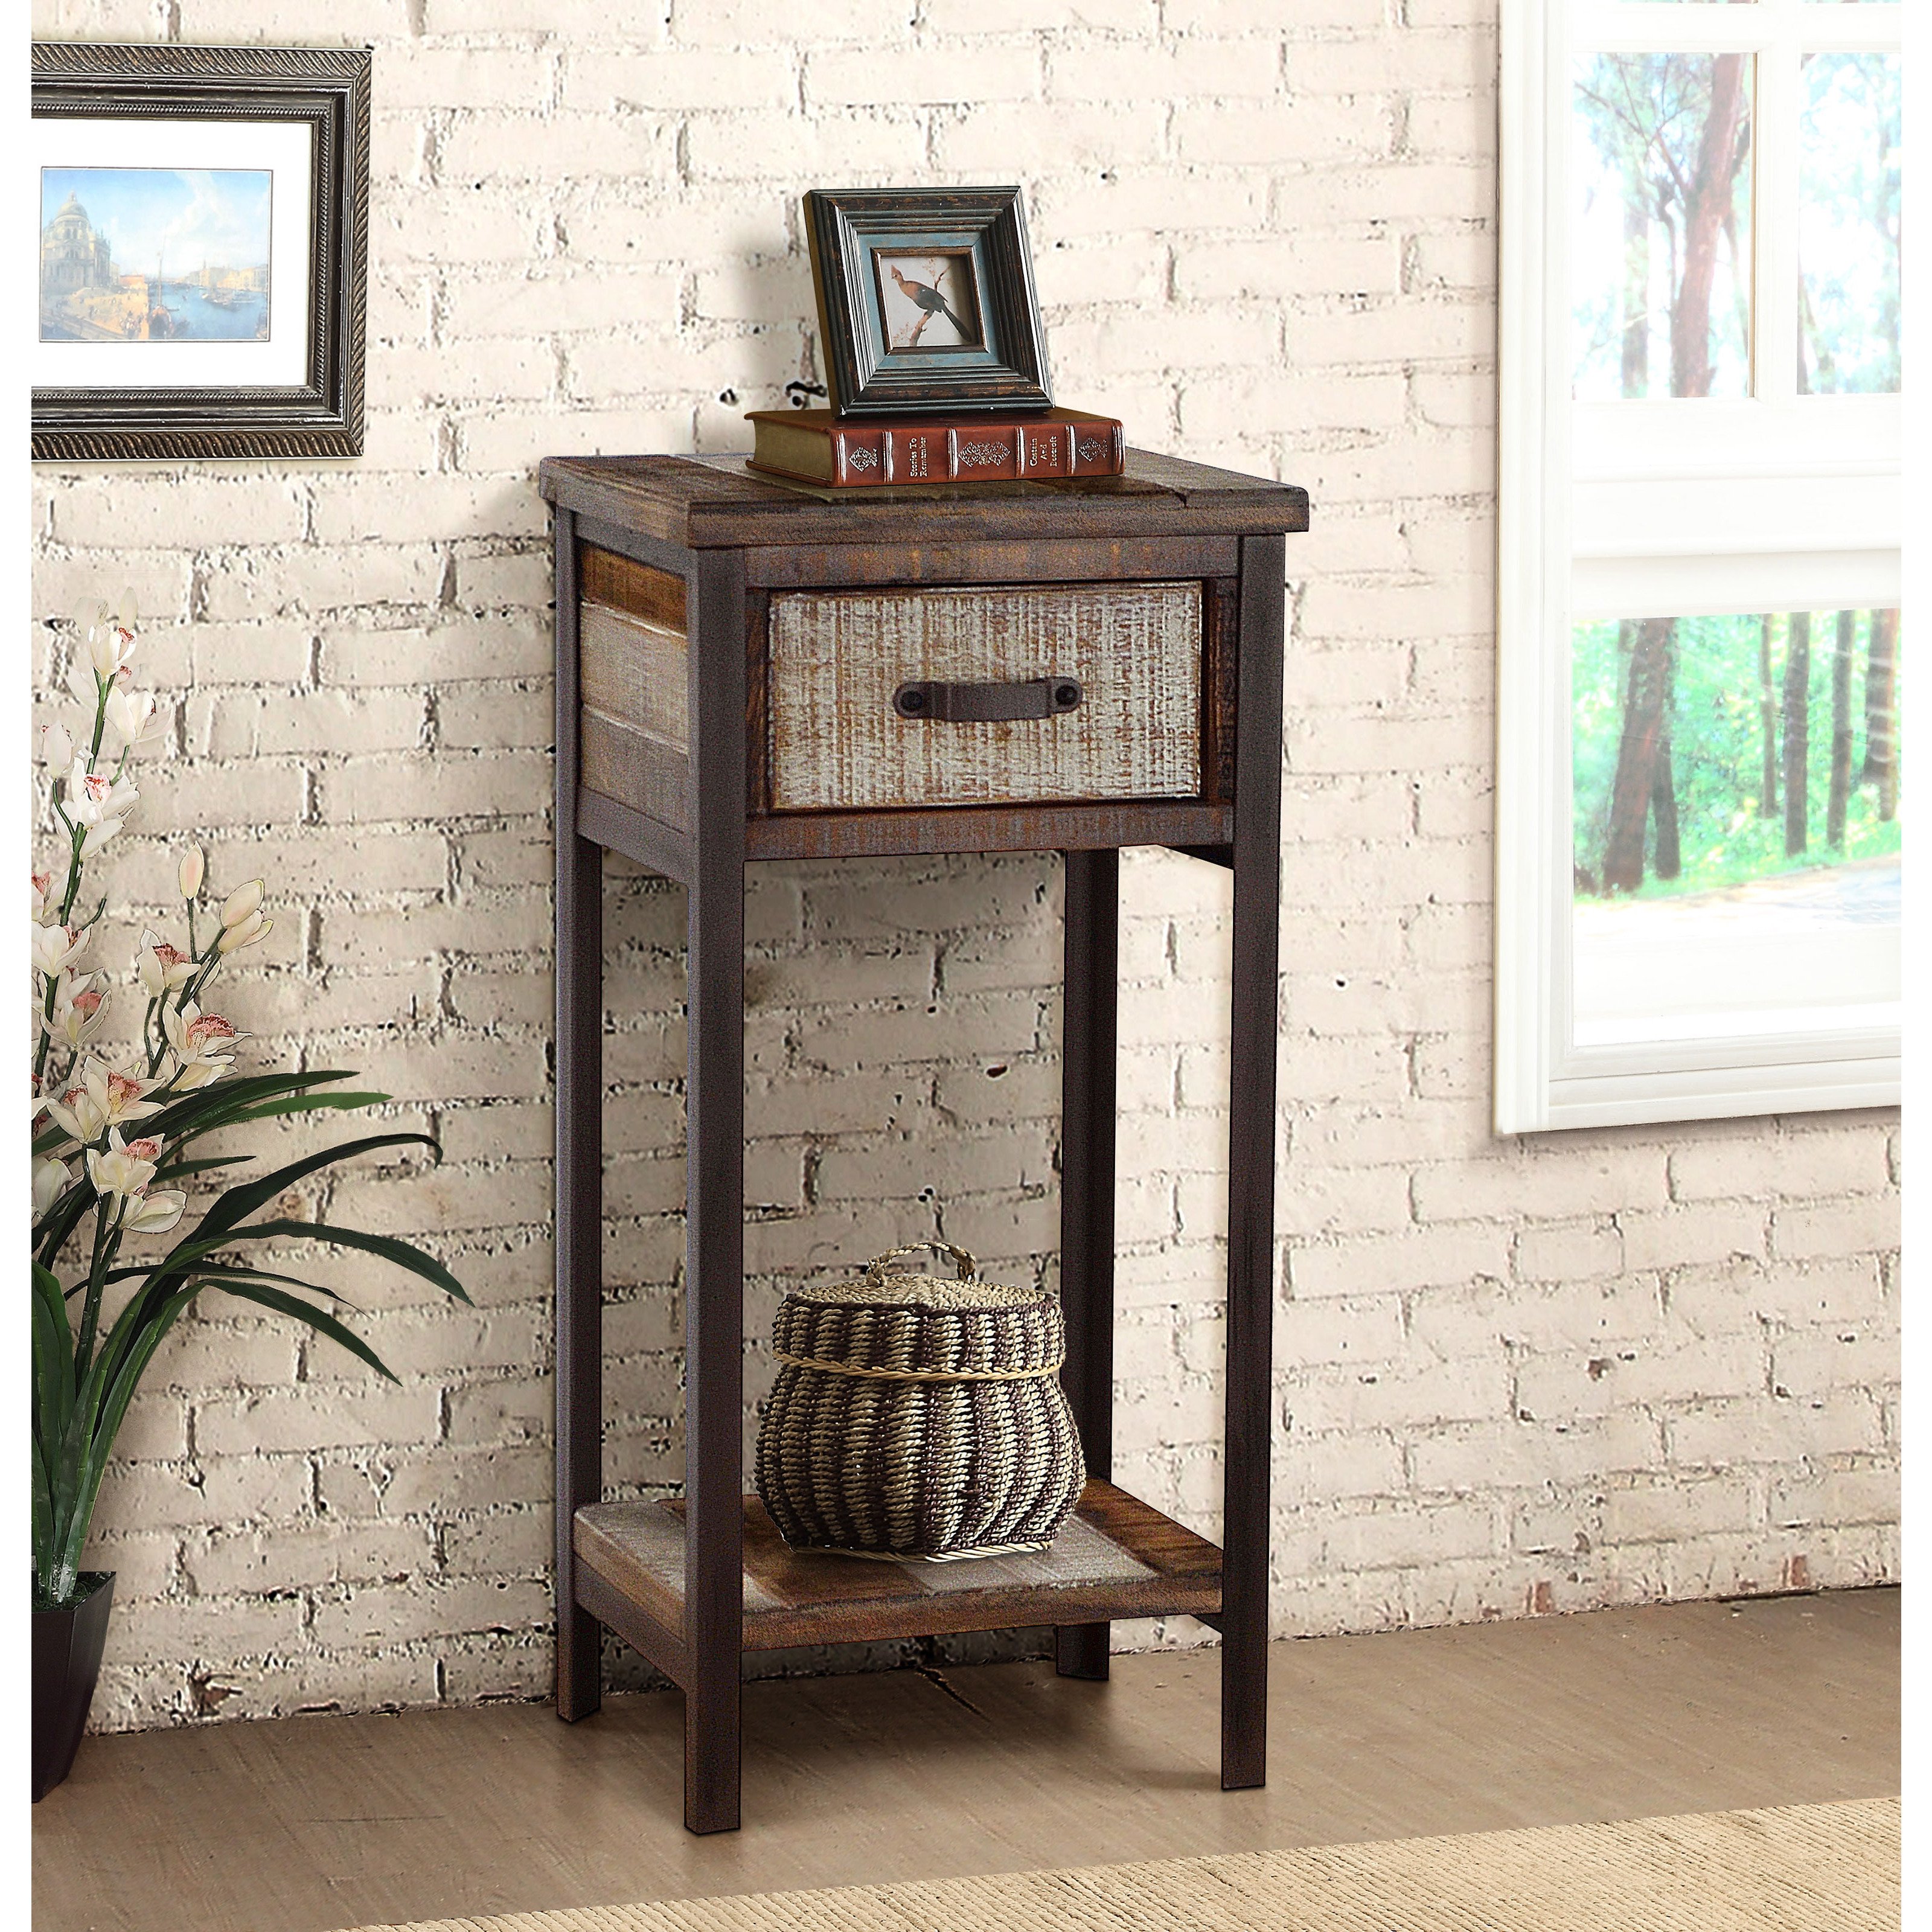 carbon loft scott wood accent table cabinet free shipping pine canopy goosefoot today backyard gazebo ballard designs pillows willow furniture living room bench glass and marble